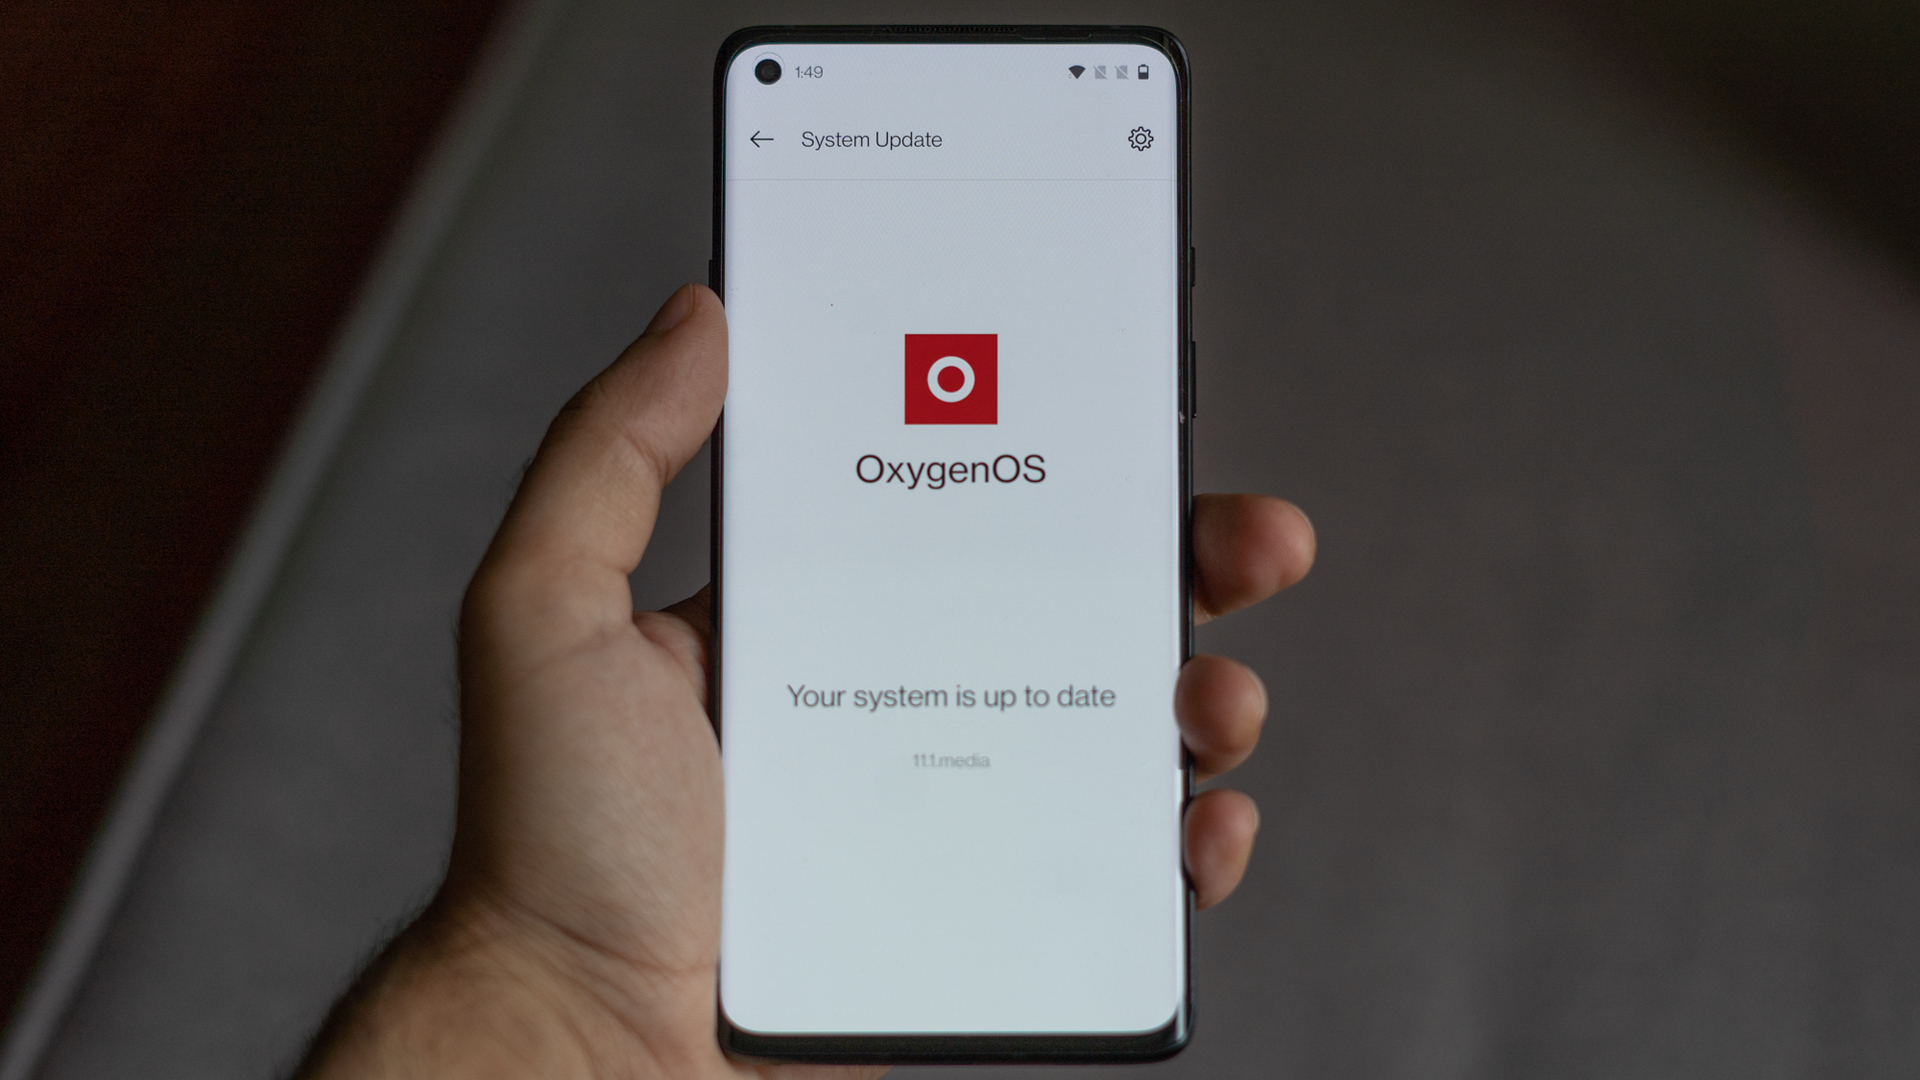 OnePlus Oxygen OS 11 Android 11 on phone in hand.